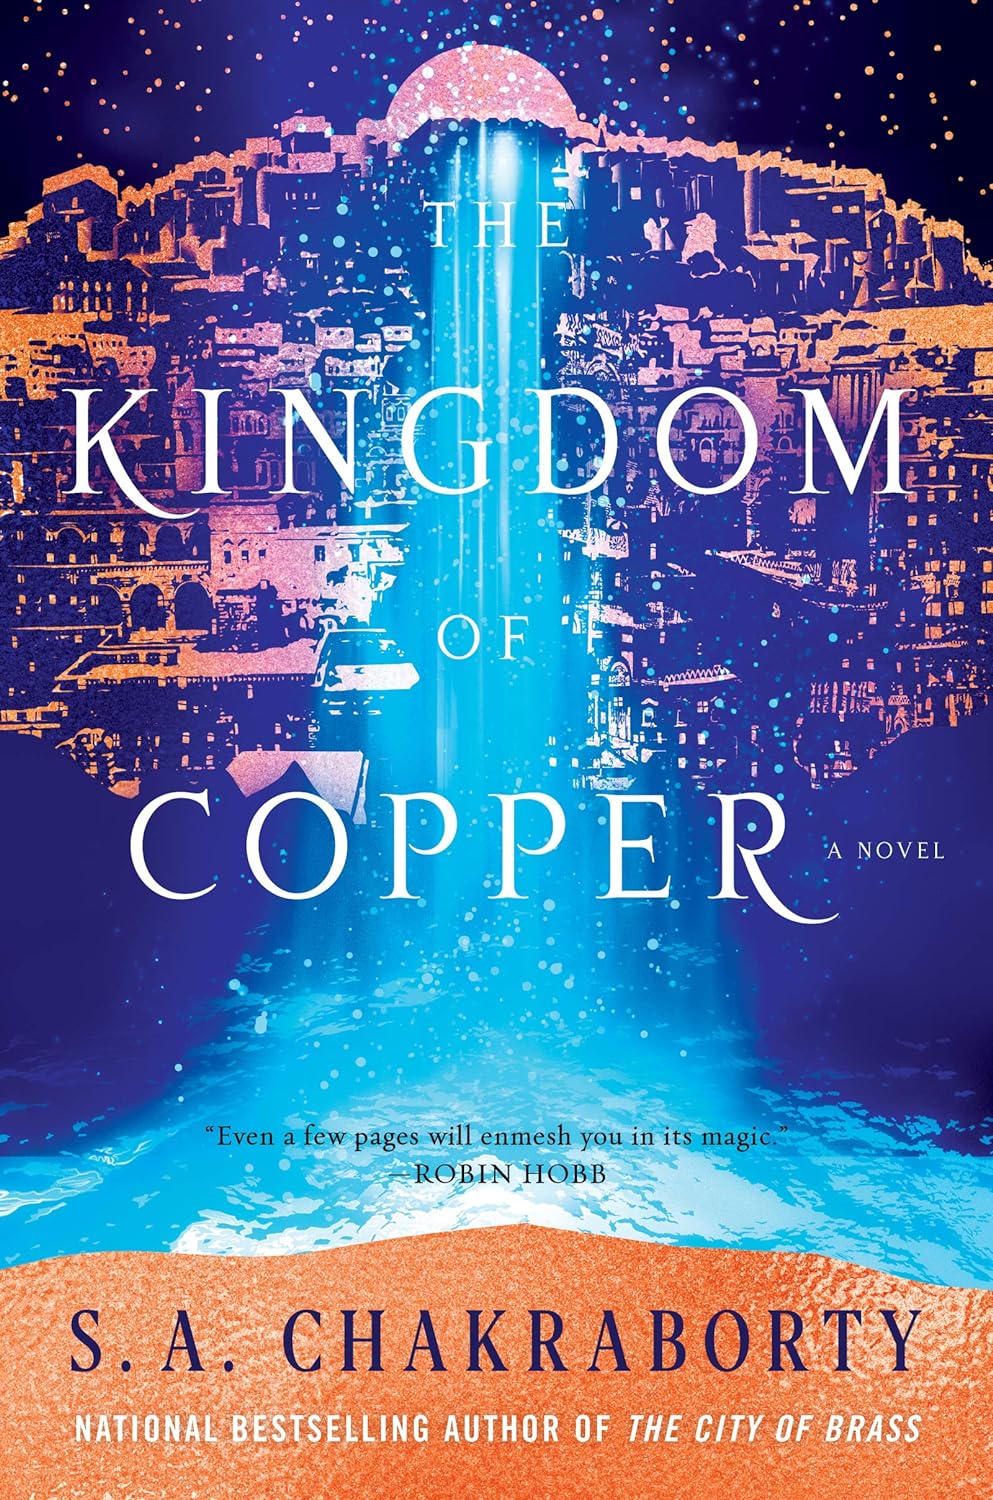 S. A Chakraborty, S. A. Chakraborty: The Kingdom of Copper (Hardcover, 2019, Harper Voyager)